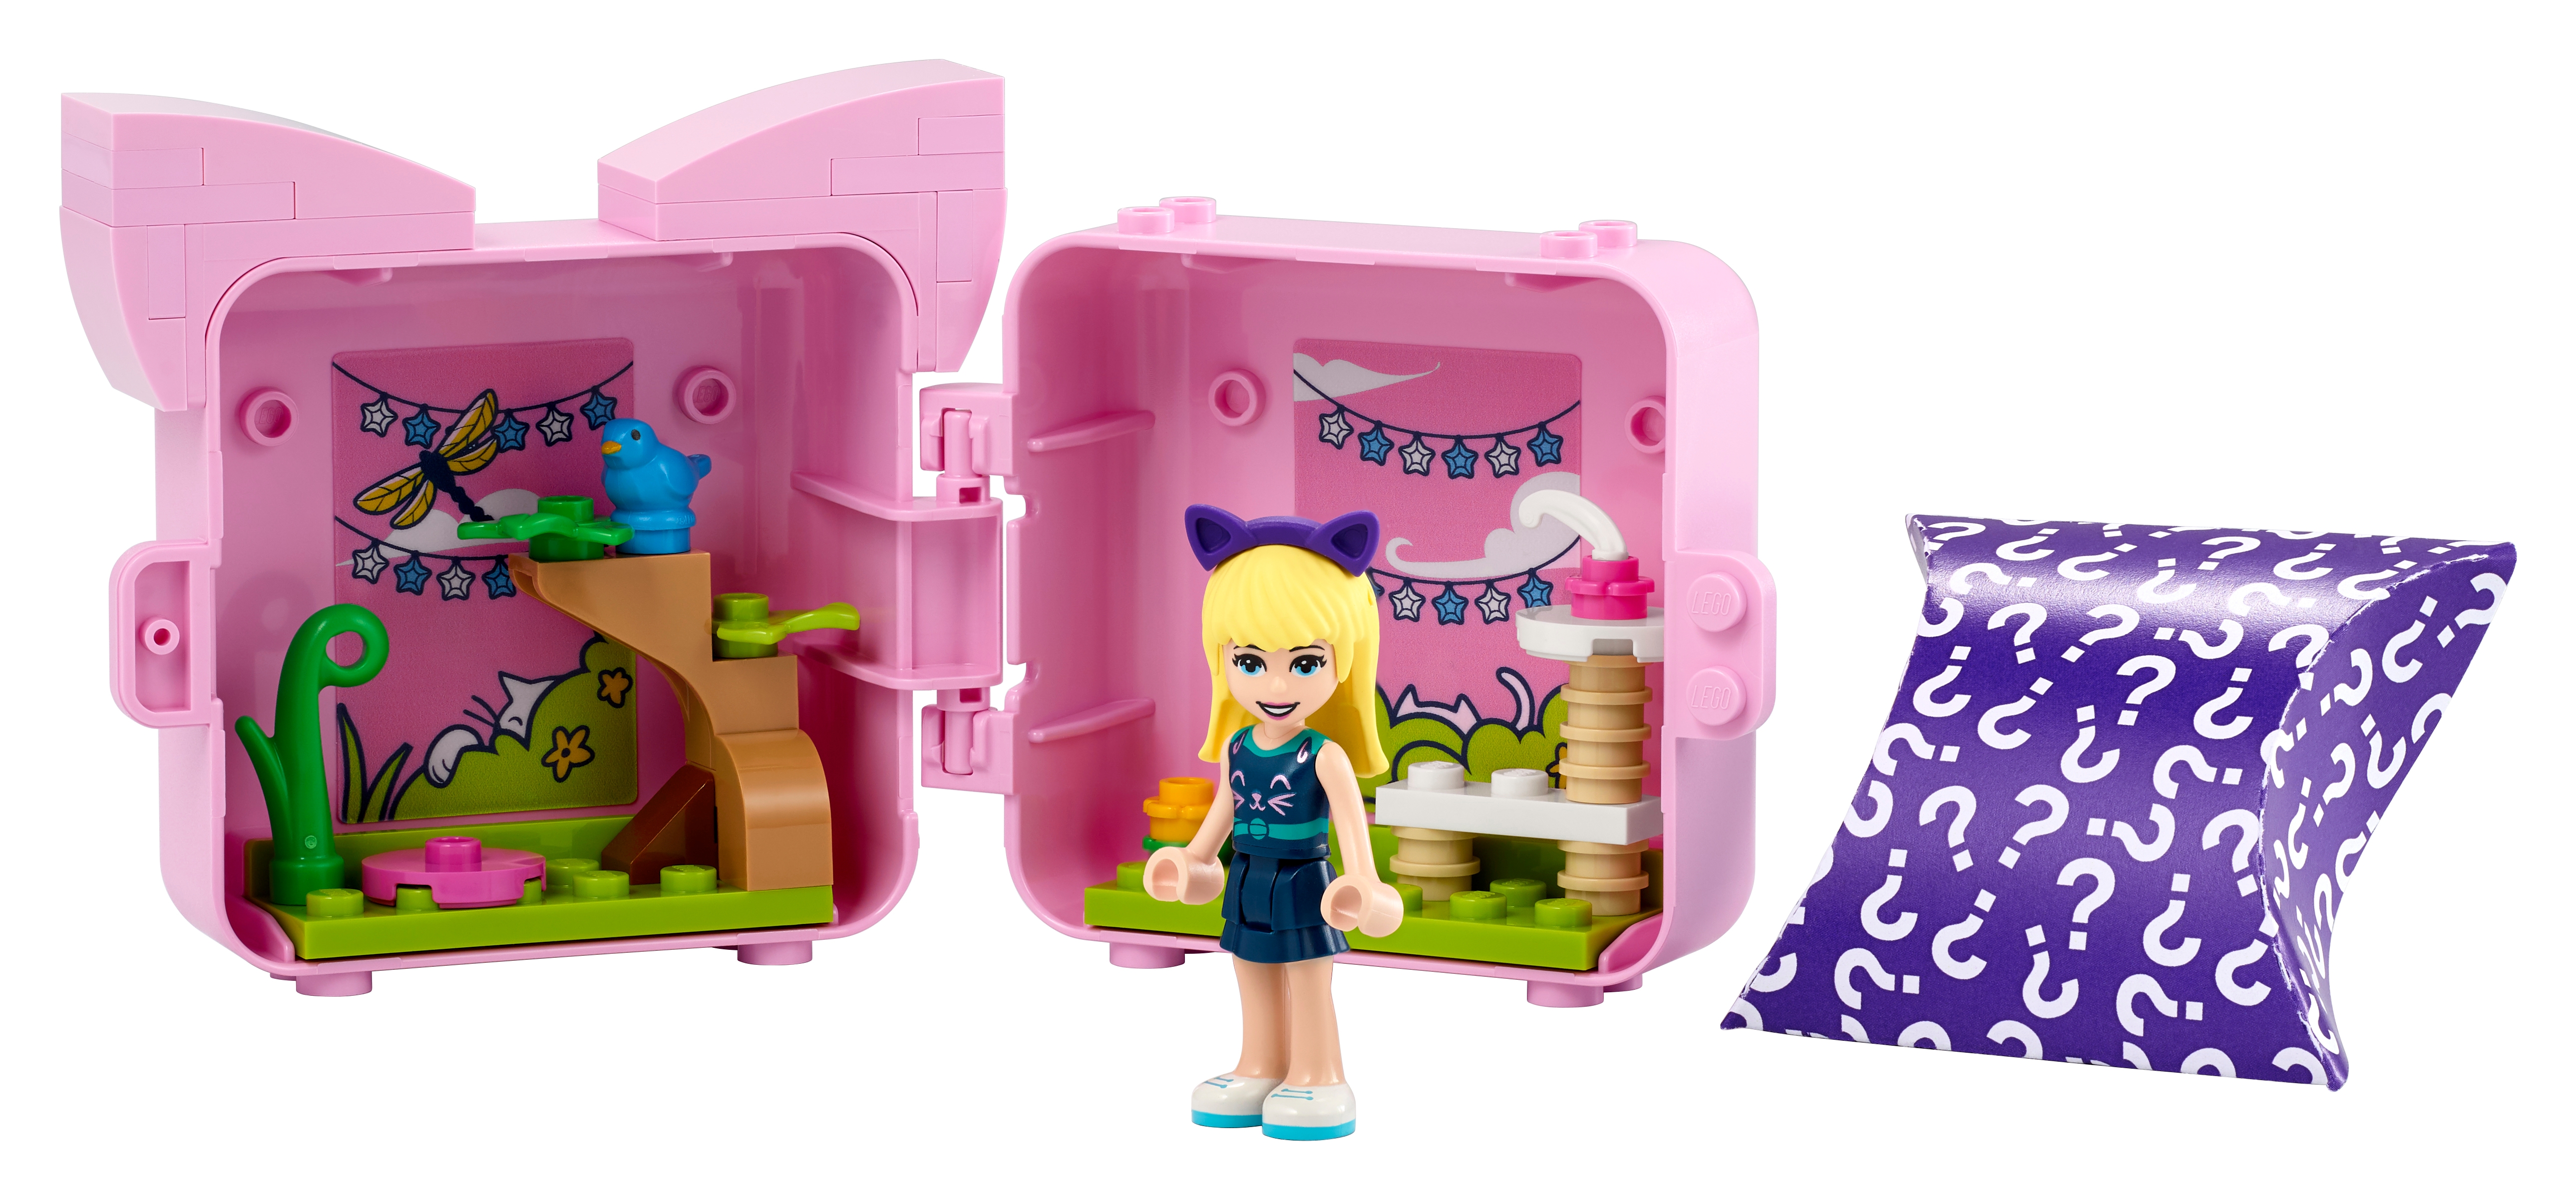 41665 LEGO Friends Stephanie's Cat Cube 46 Pieces Age 5 Years+ 